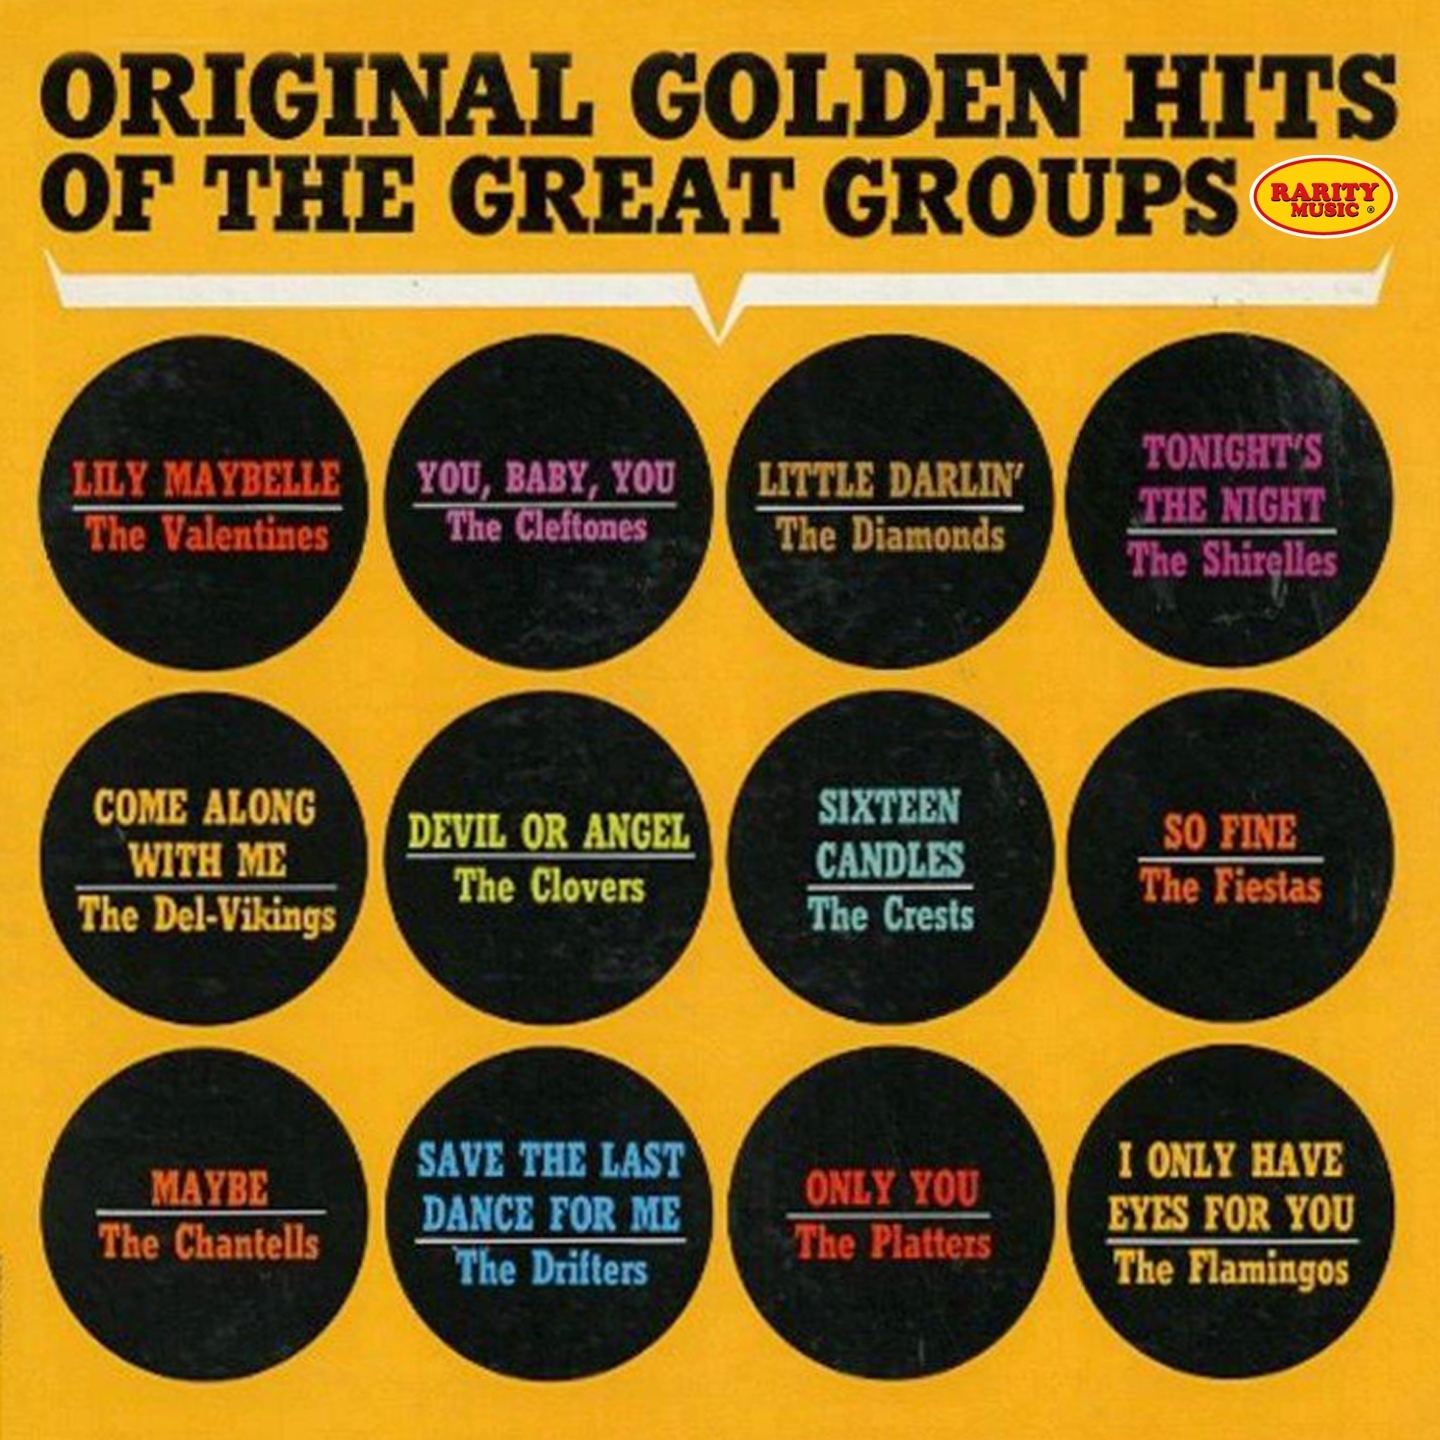 Original Golden Hits of the Great Groups